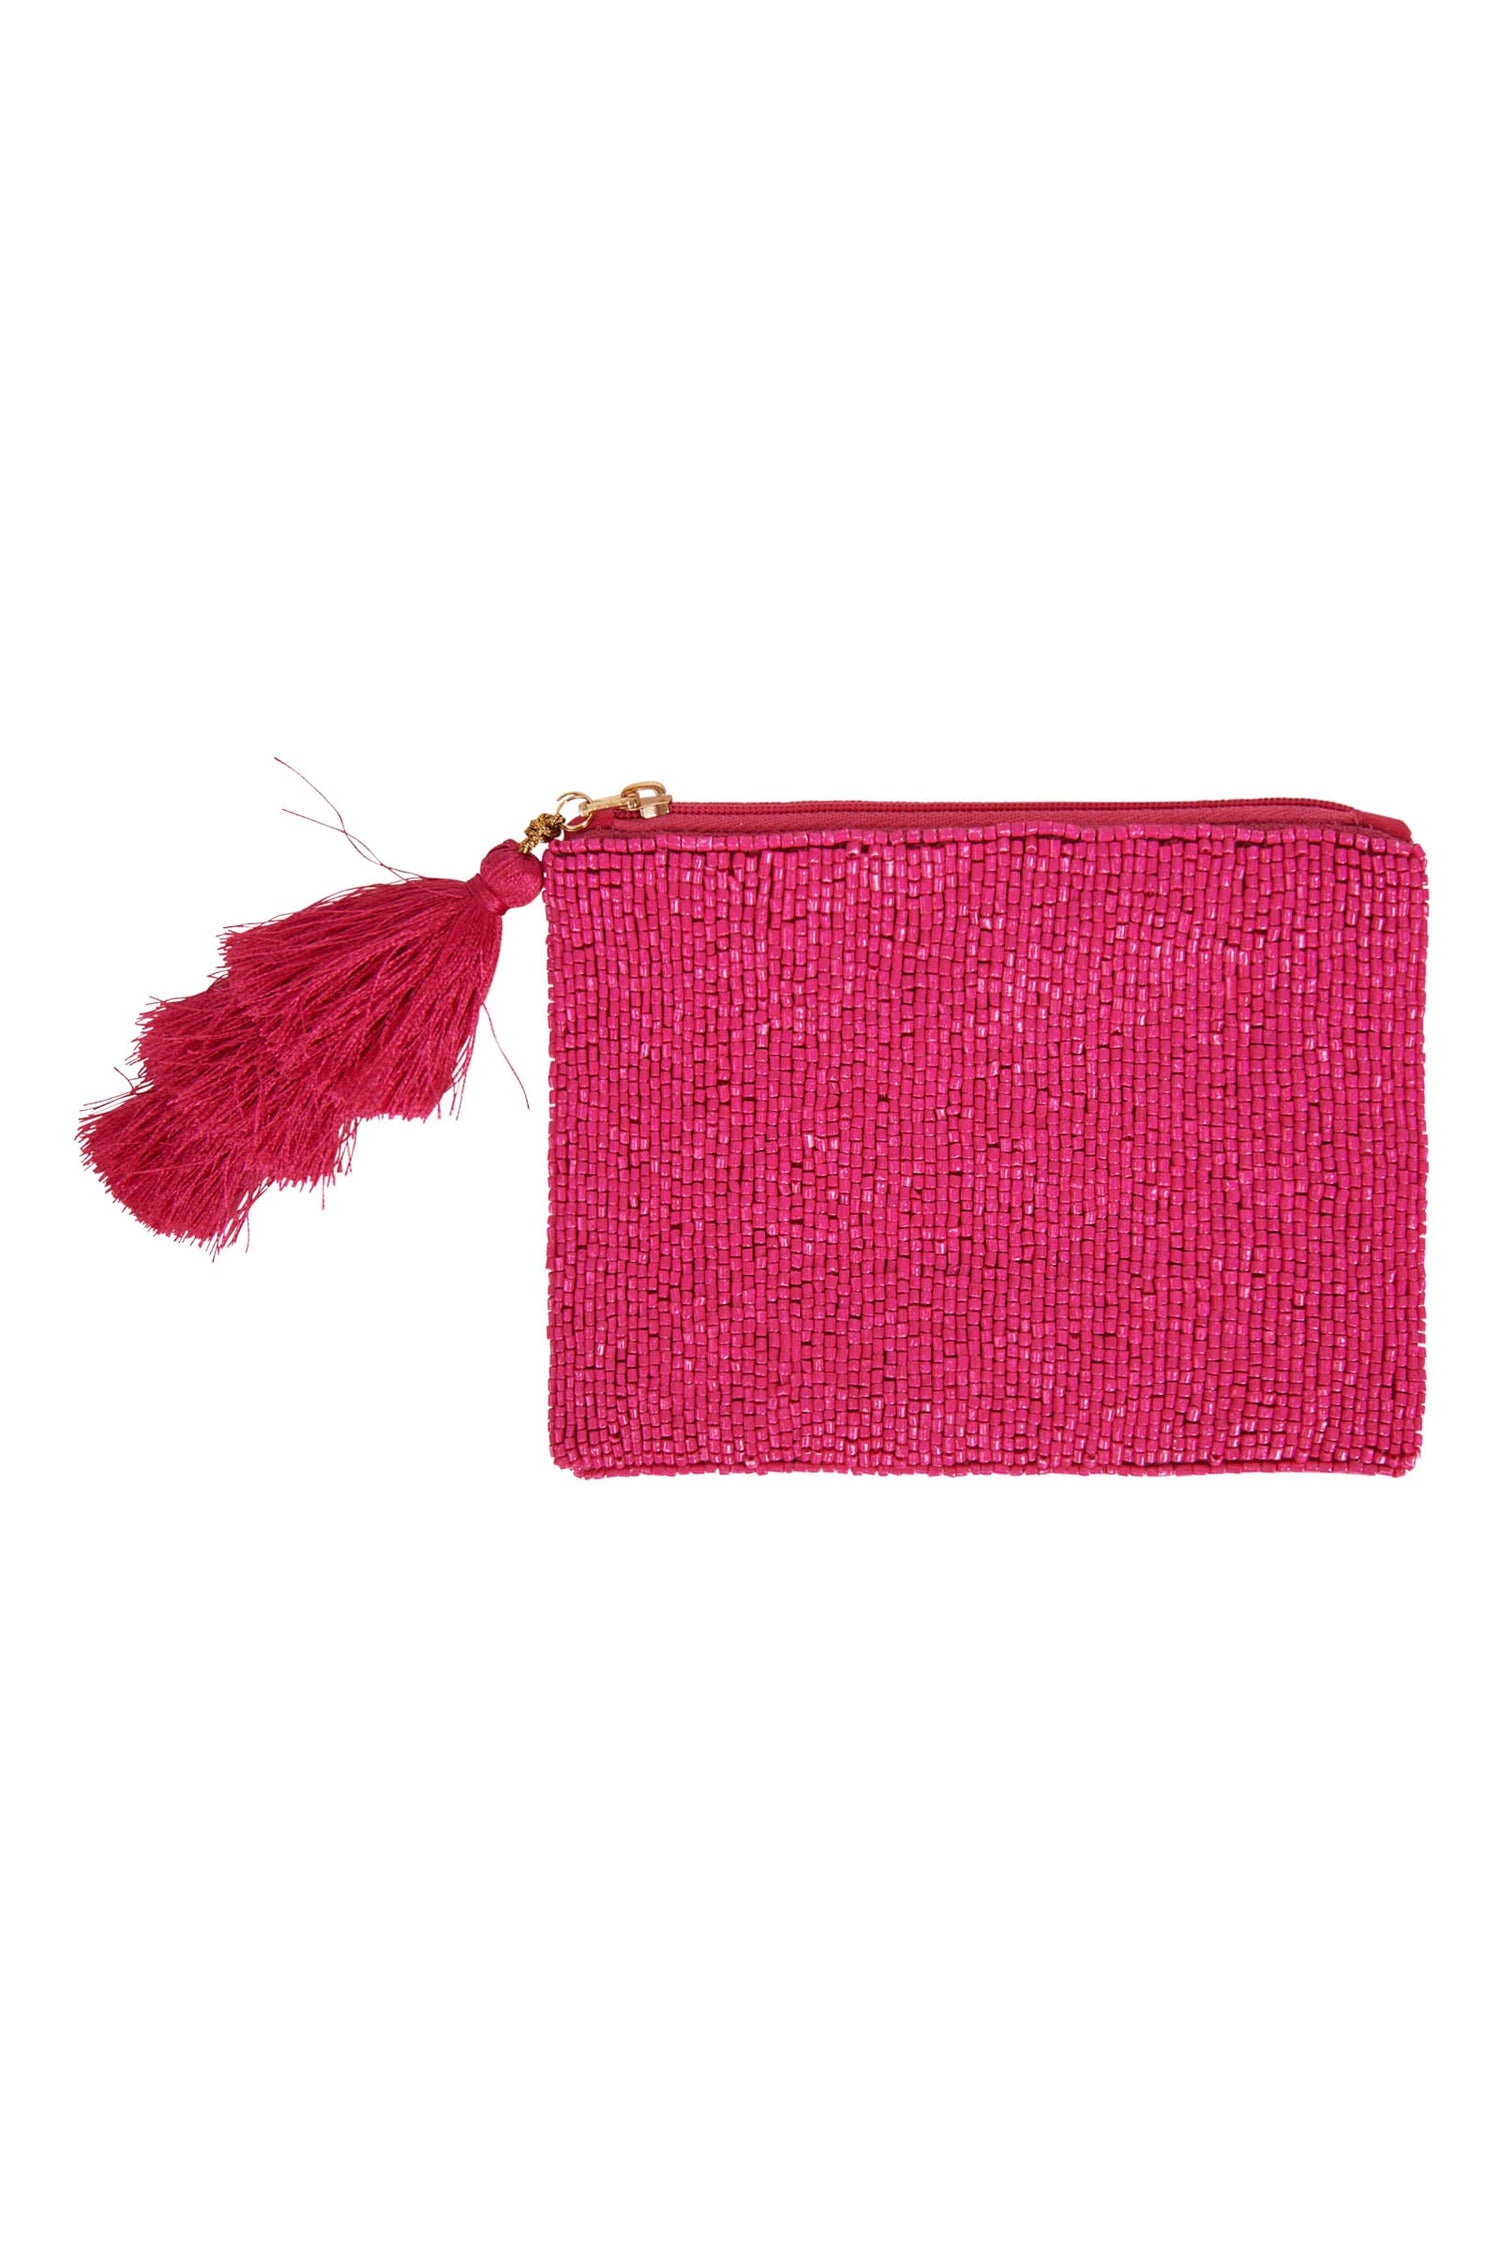 Eb&amp;Ive Flourish Pouch Candy Pink